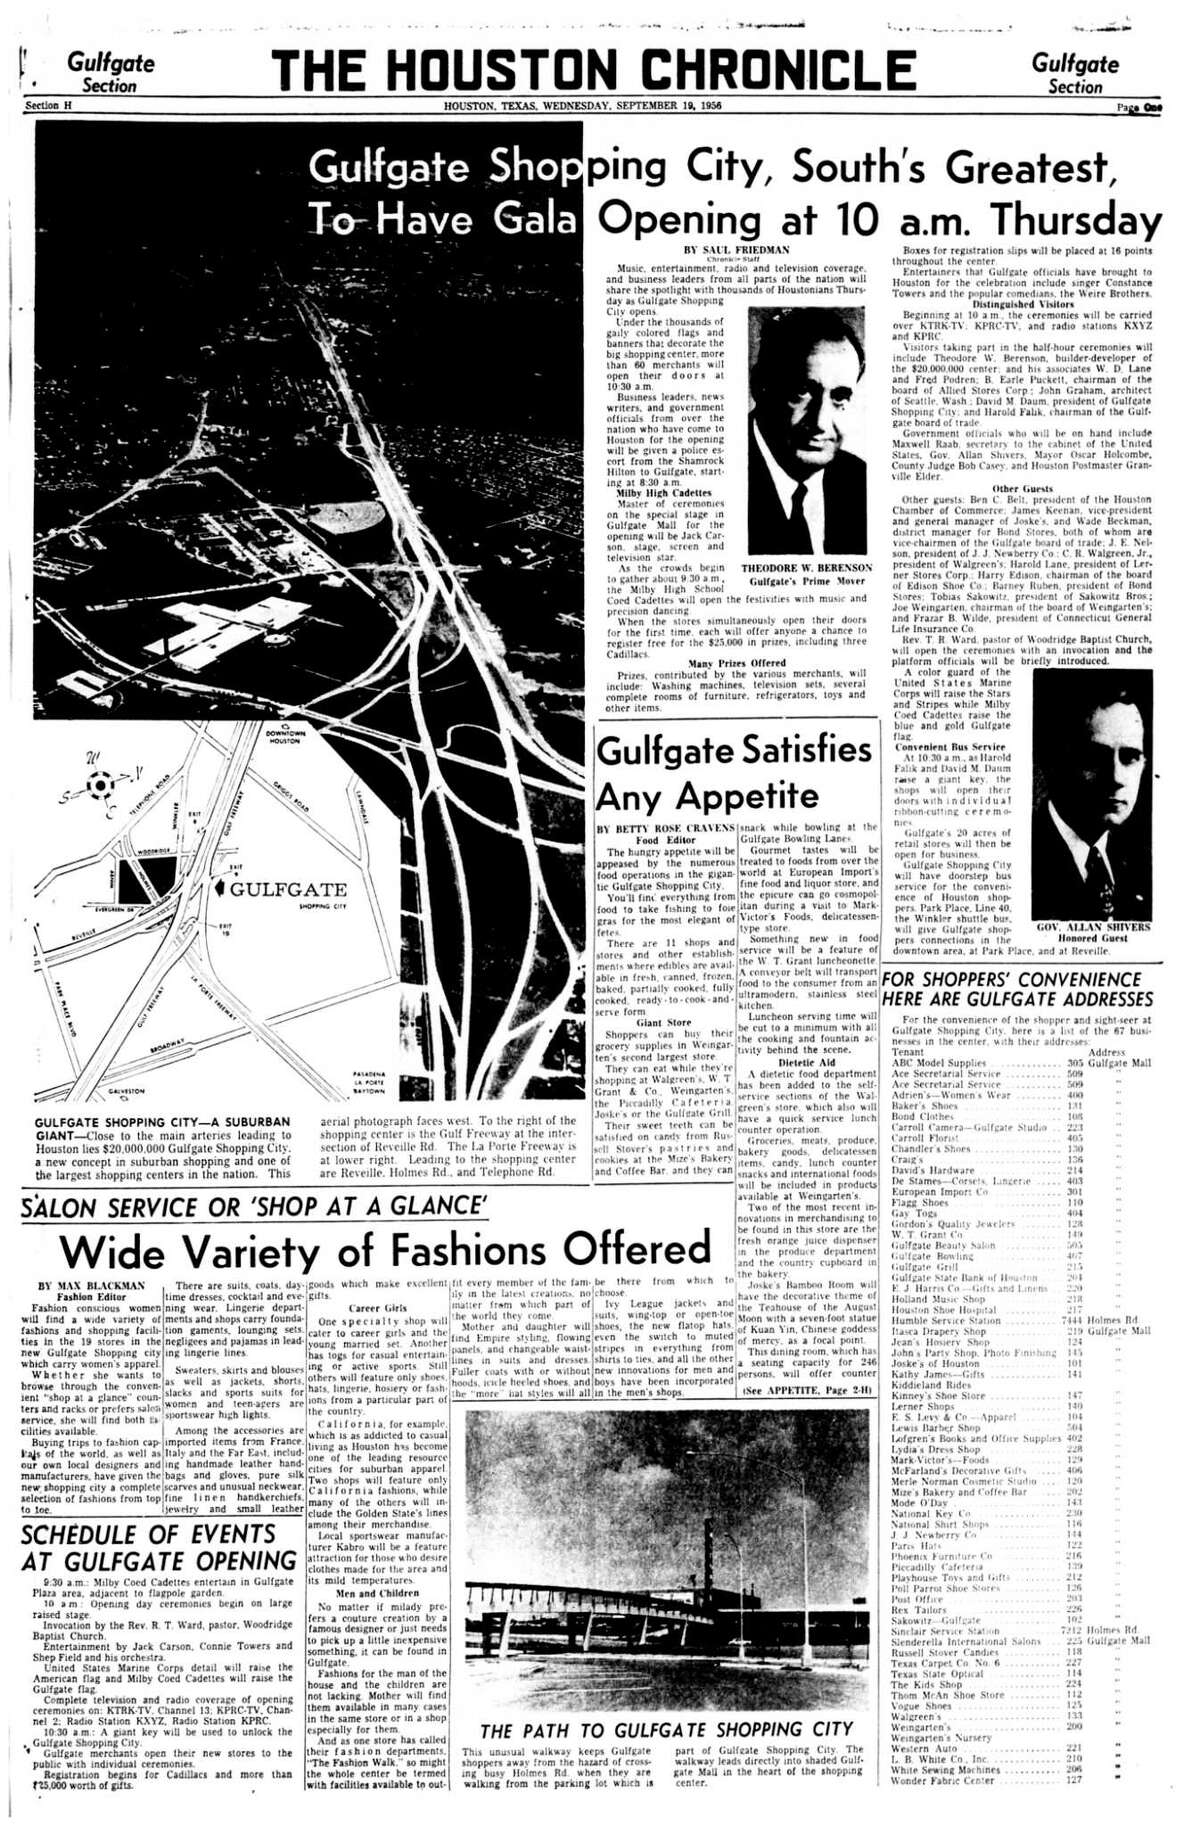 Houston Chronicle inside page - September 19, 1956 - section H, page 1. Gulfgate Shopping City, South's Greatest, To Have Gala Opening at 10 a.m. Thursday